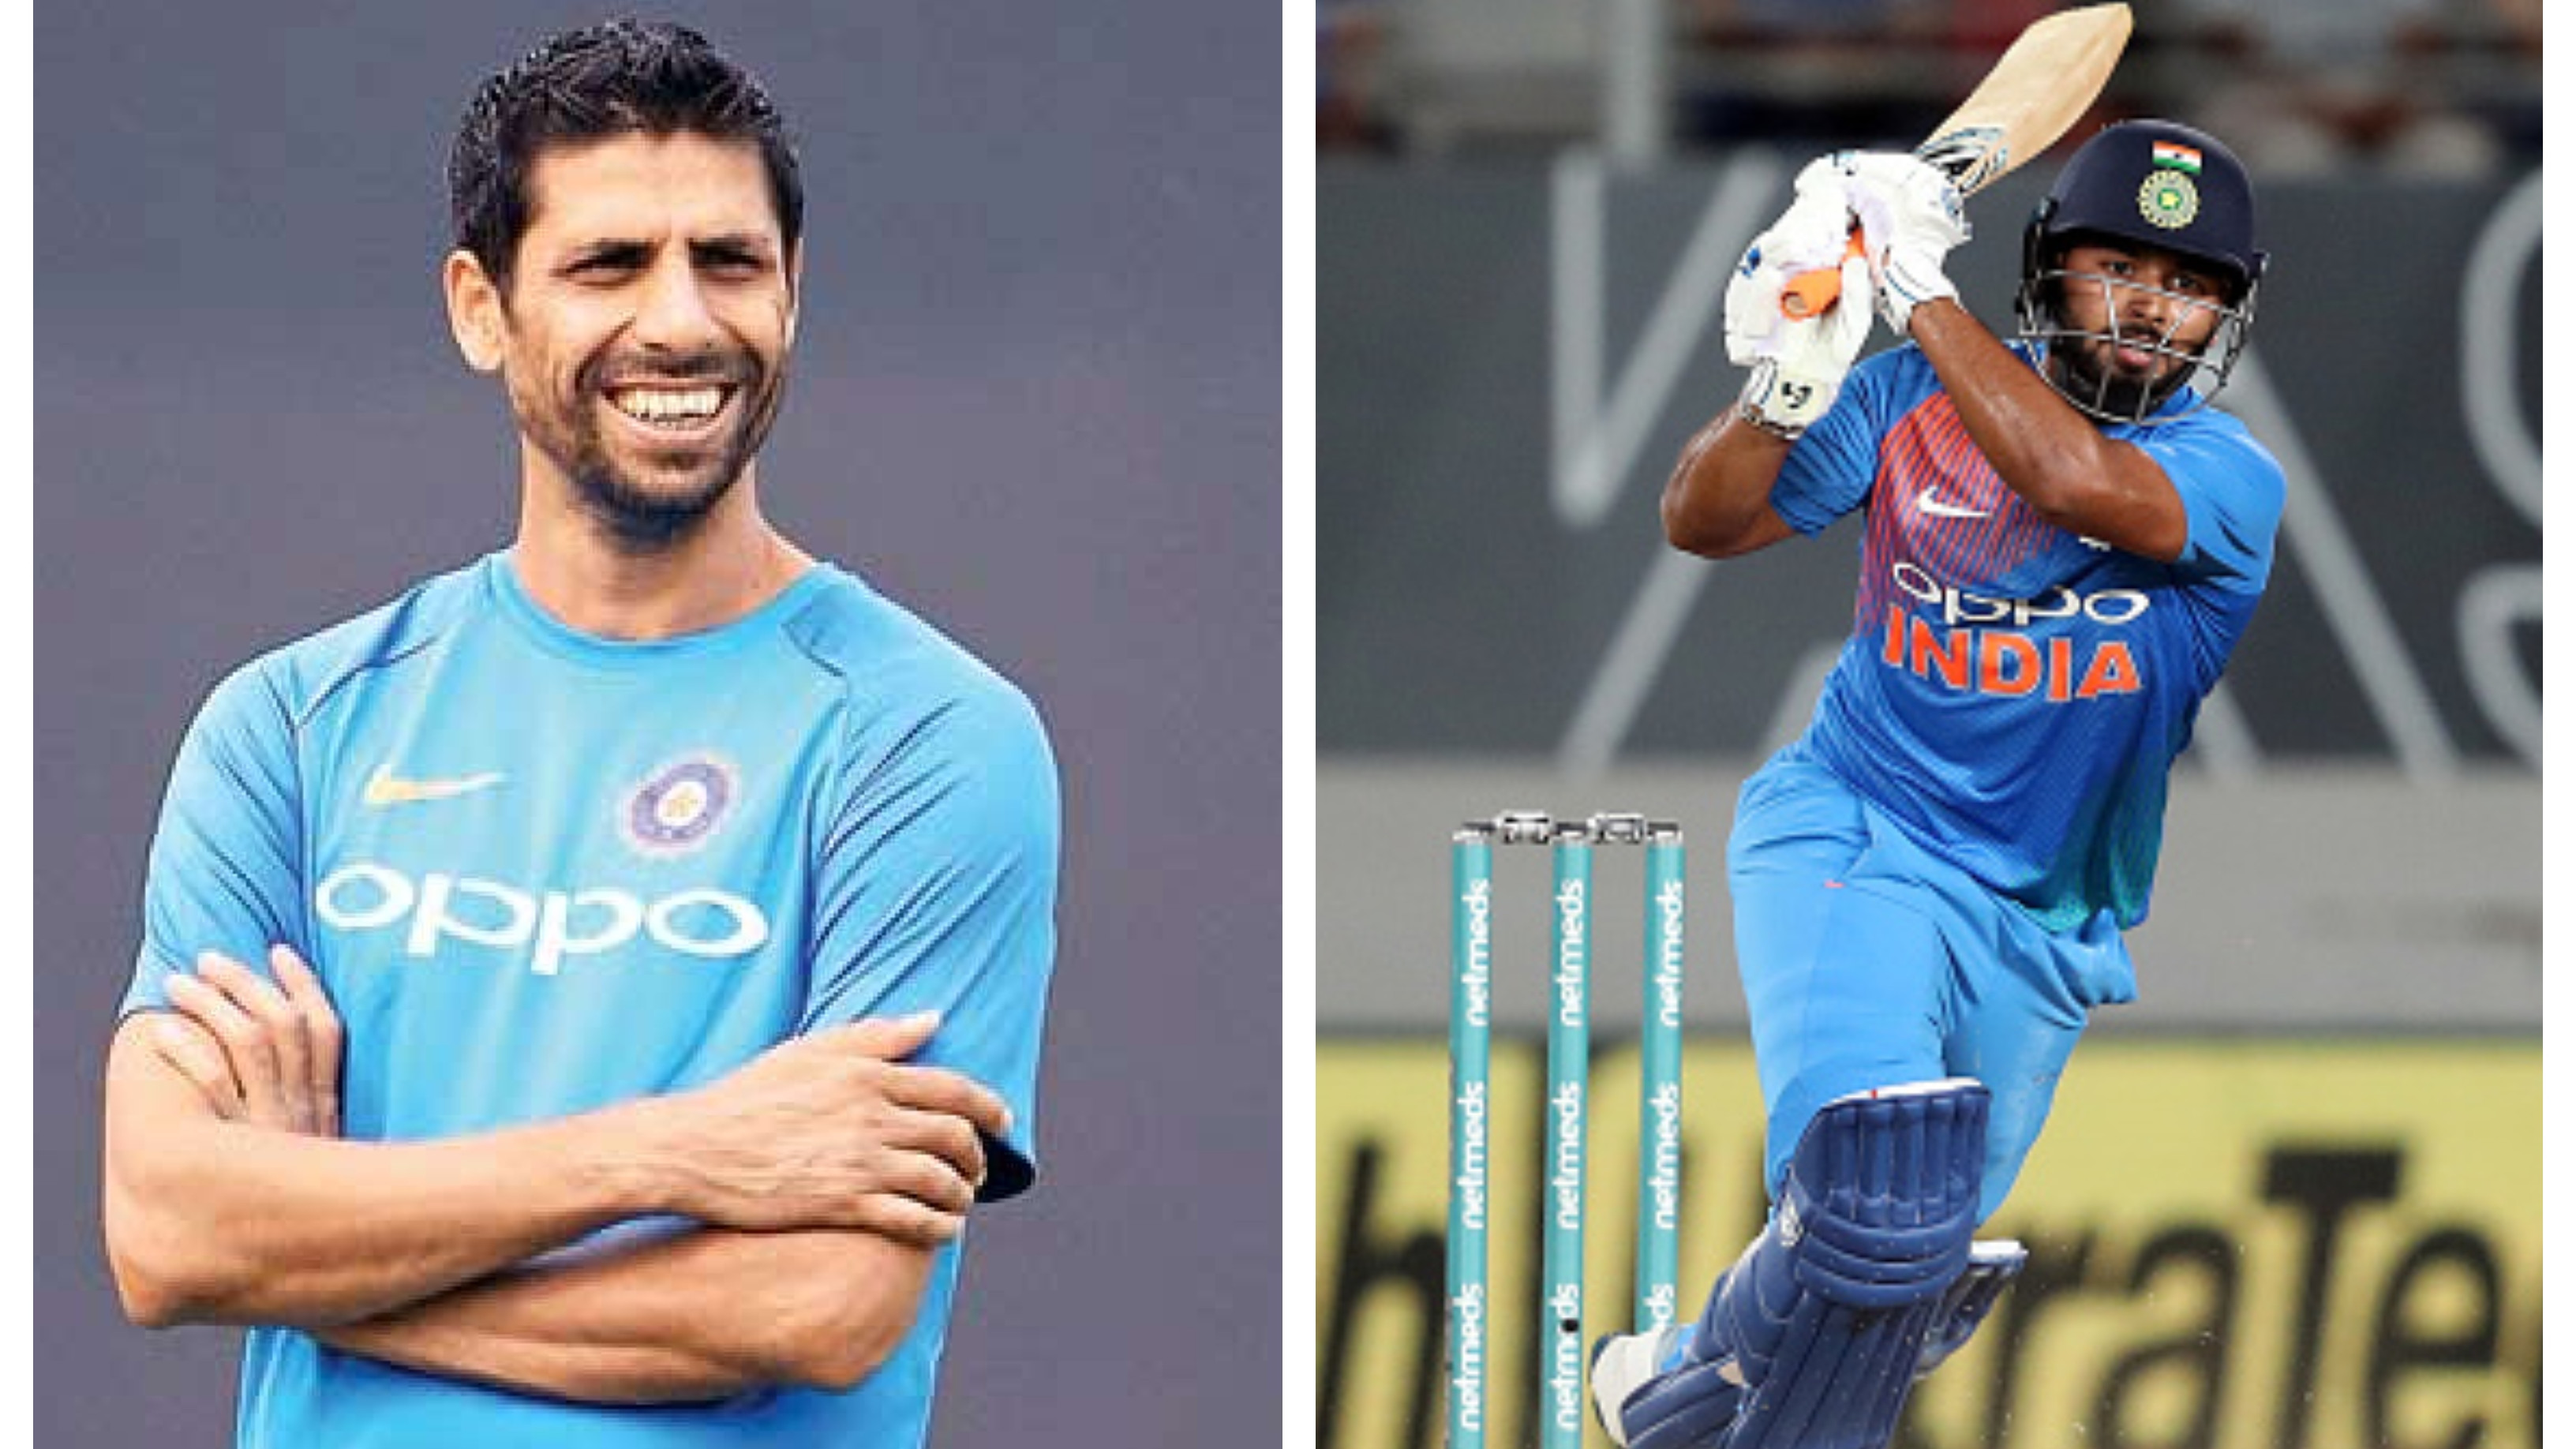 Nehra bats for Rishabh Pant’s inclusion in India's World Cup squad with